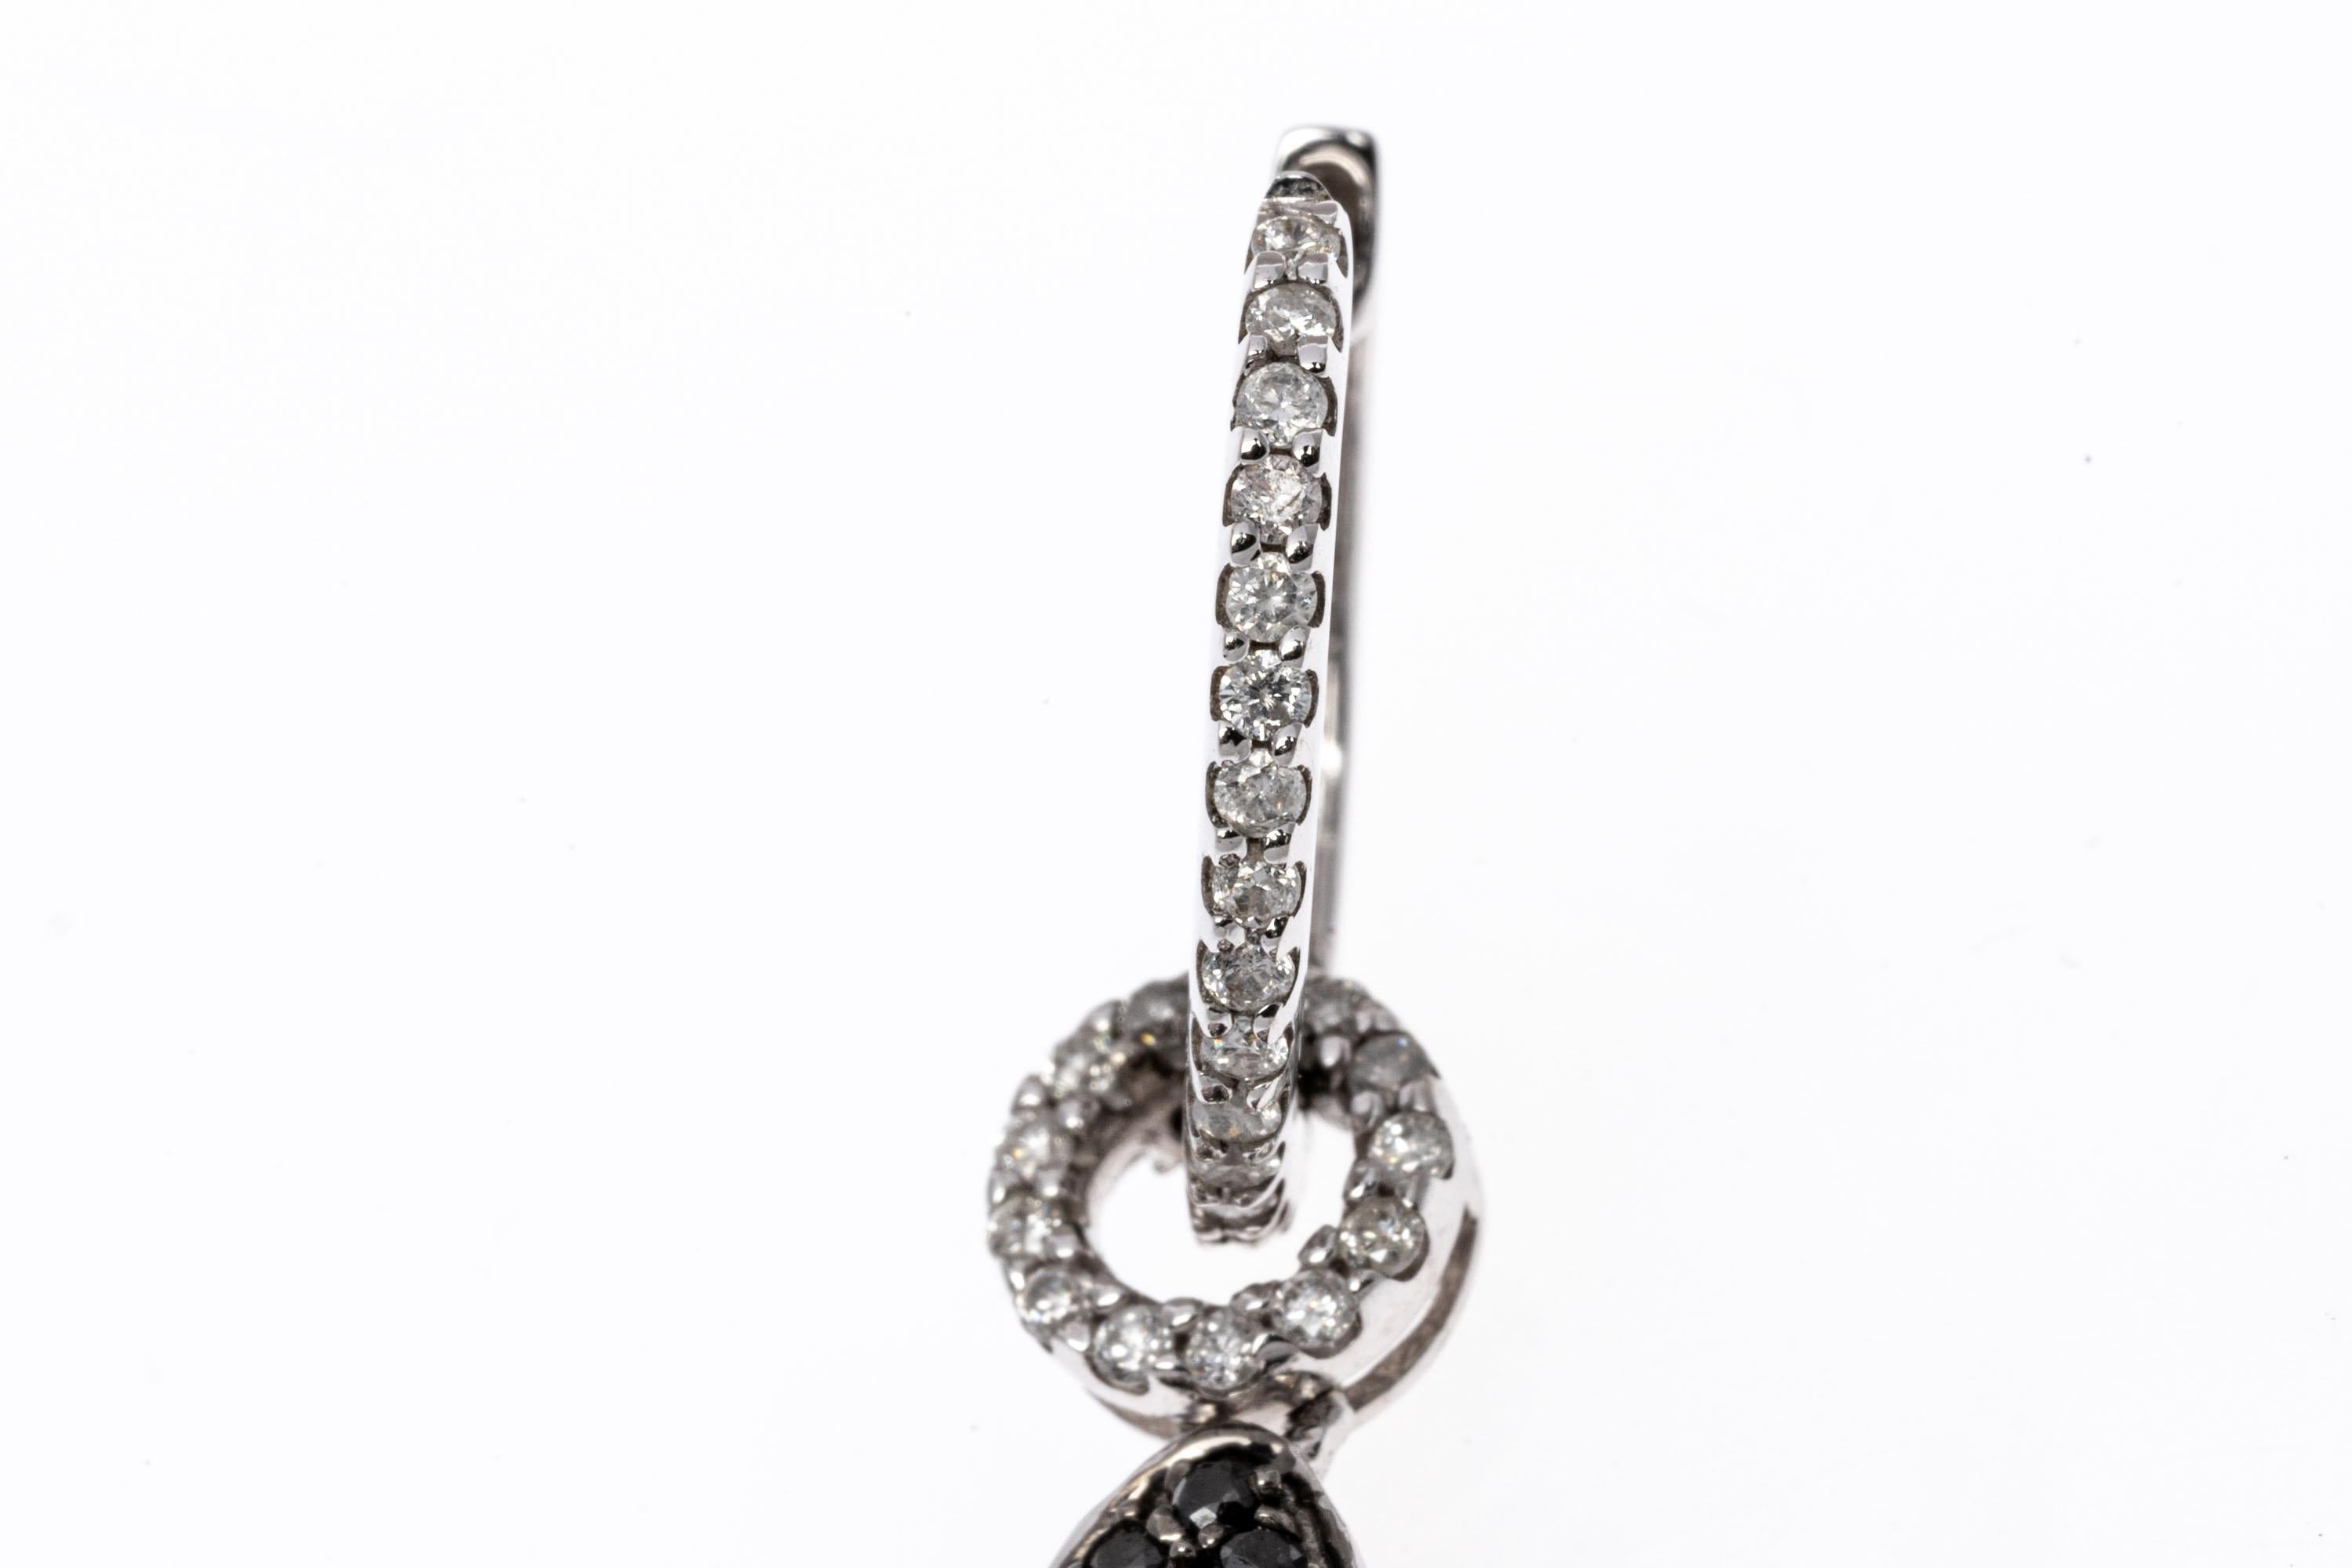 14k white gold earrings. These fabulous earrings contain a small hoop top, set with a row of round faceted, white diamonds. Suspended from the hoop is a pear shaped open drop style pendant, bordered with a scalloped edge of round faceted black